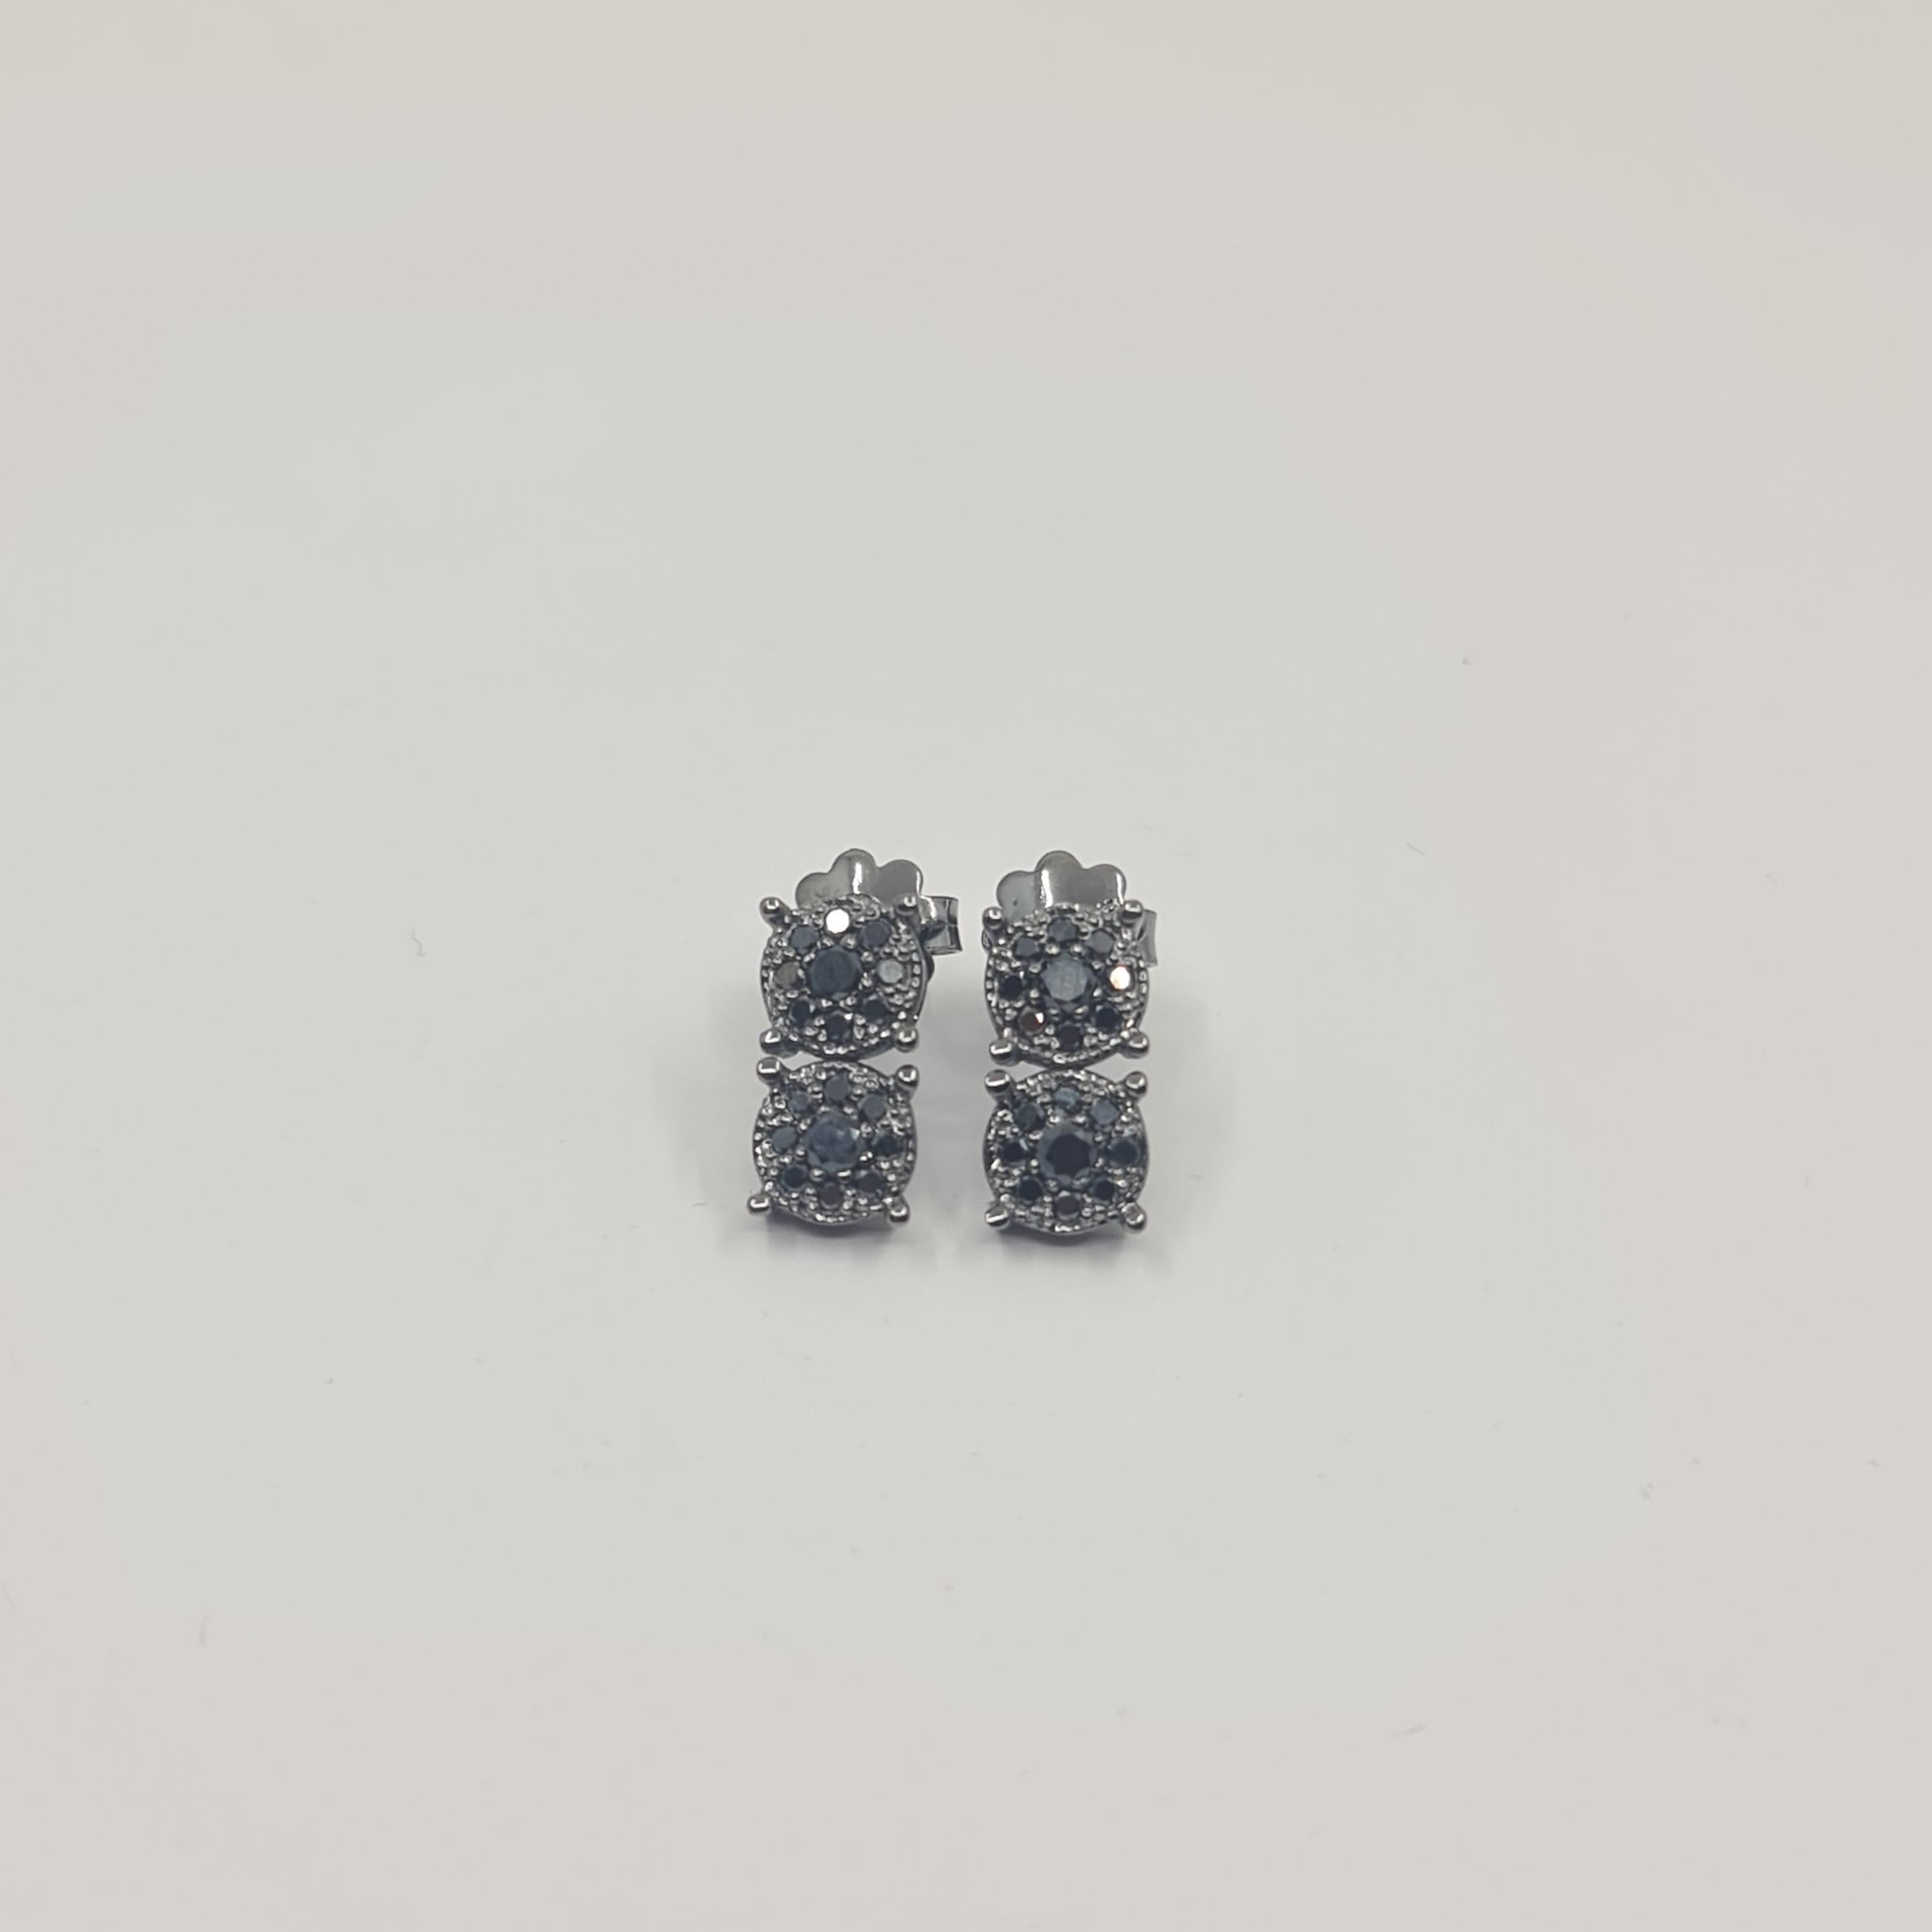 Exquisite Black Diamond Earrings 0.57 Carat in 18K Black Gold Round Cut

Black is Beautiful. Black is Powerful.
We are very excited to introduce our brand new BLACK STARS collection worldwide! 
All Black Diamonds set in Black Coated 18K Gold. 
Pure